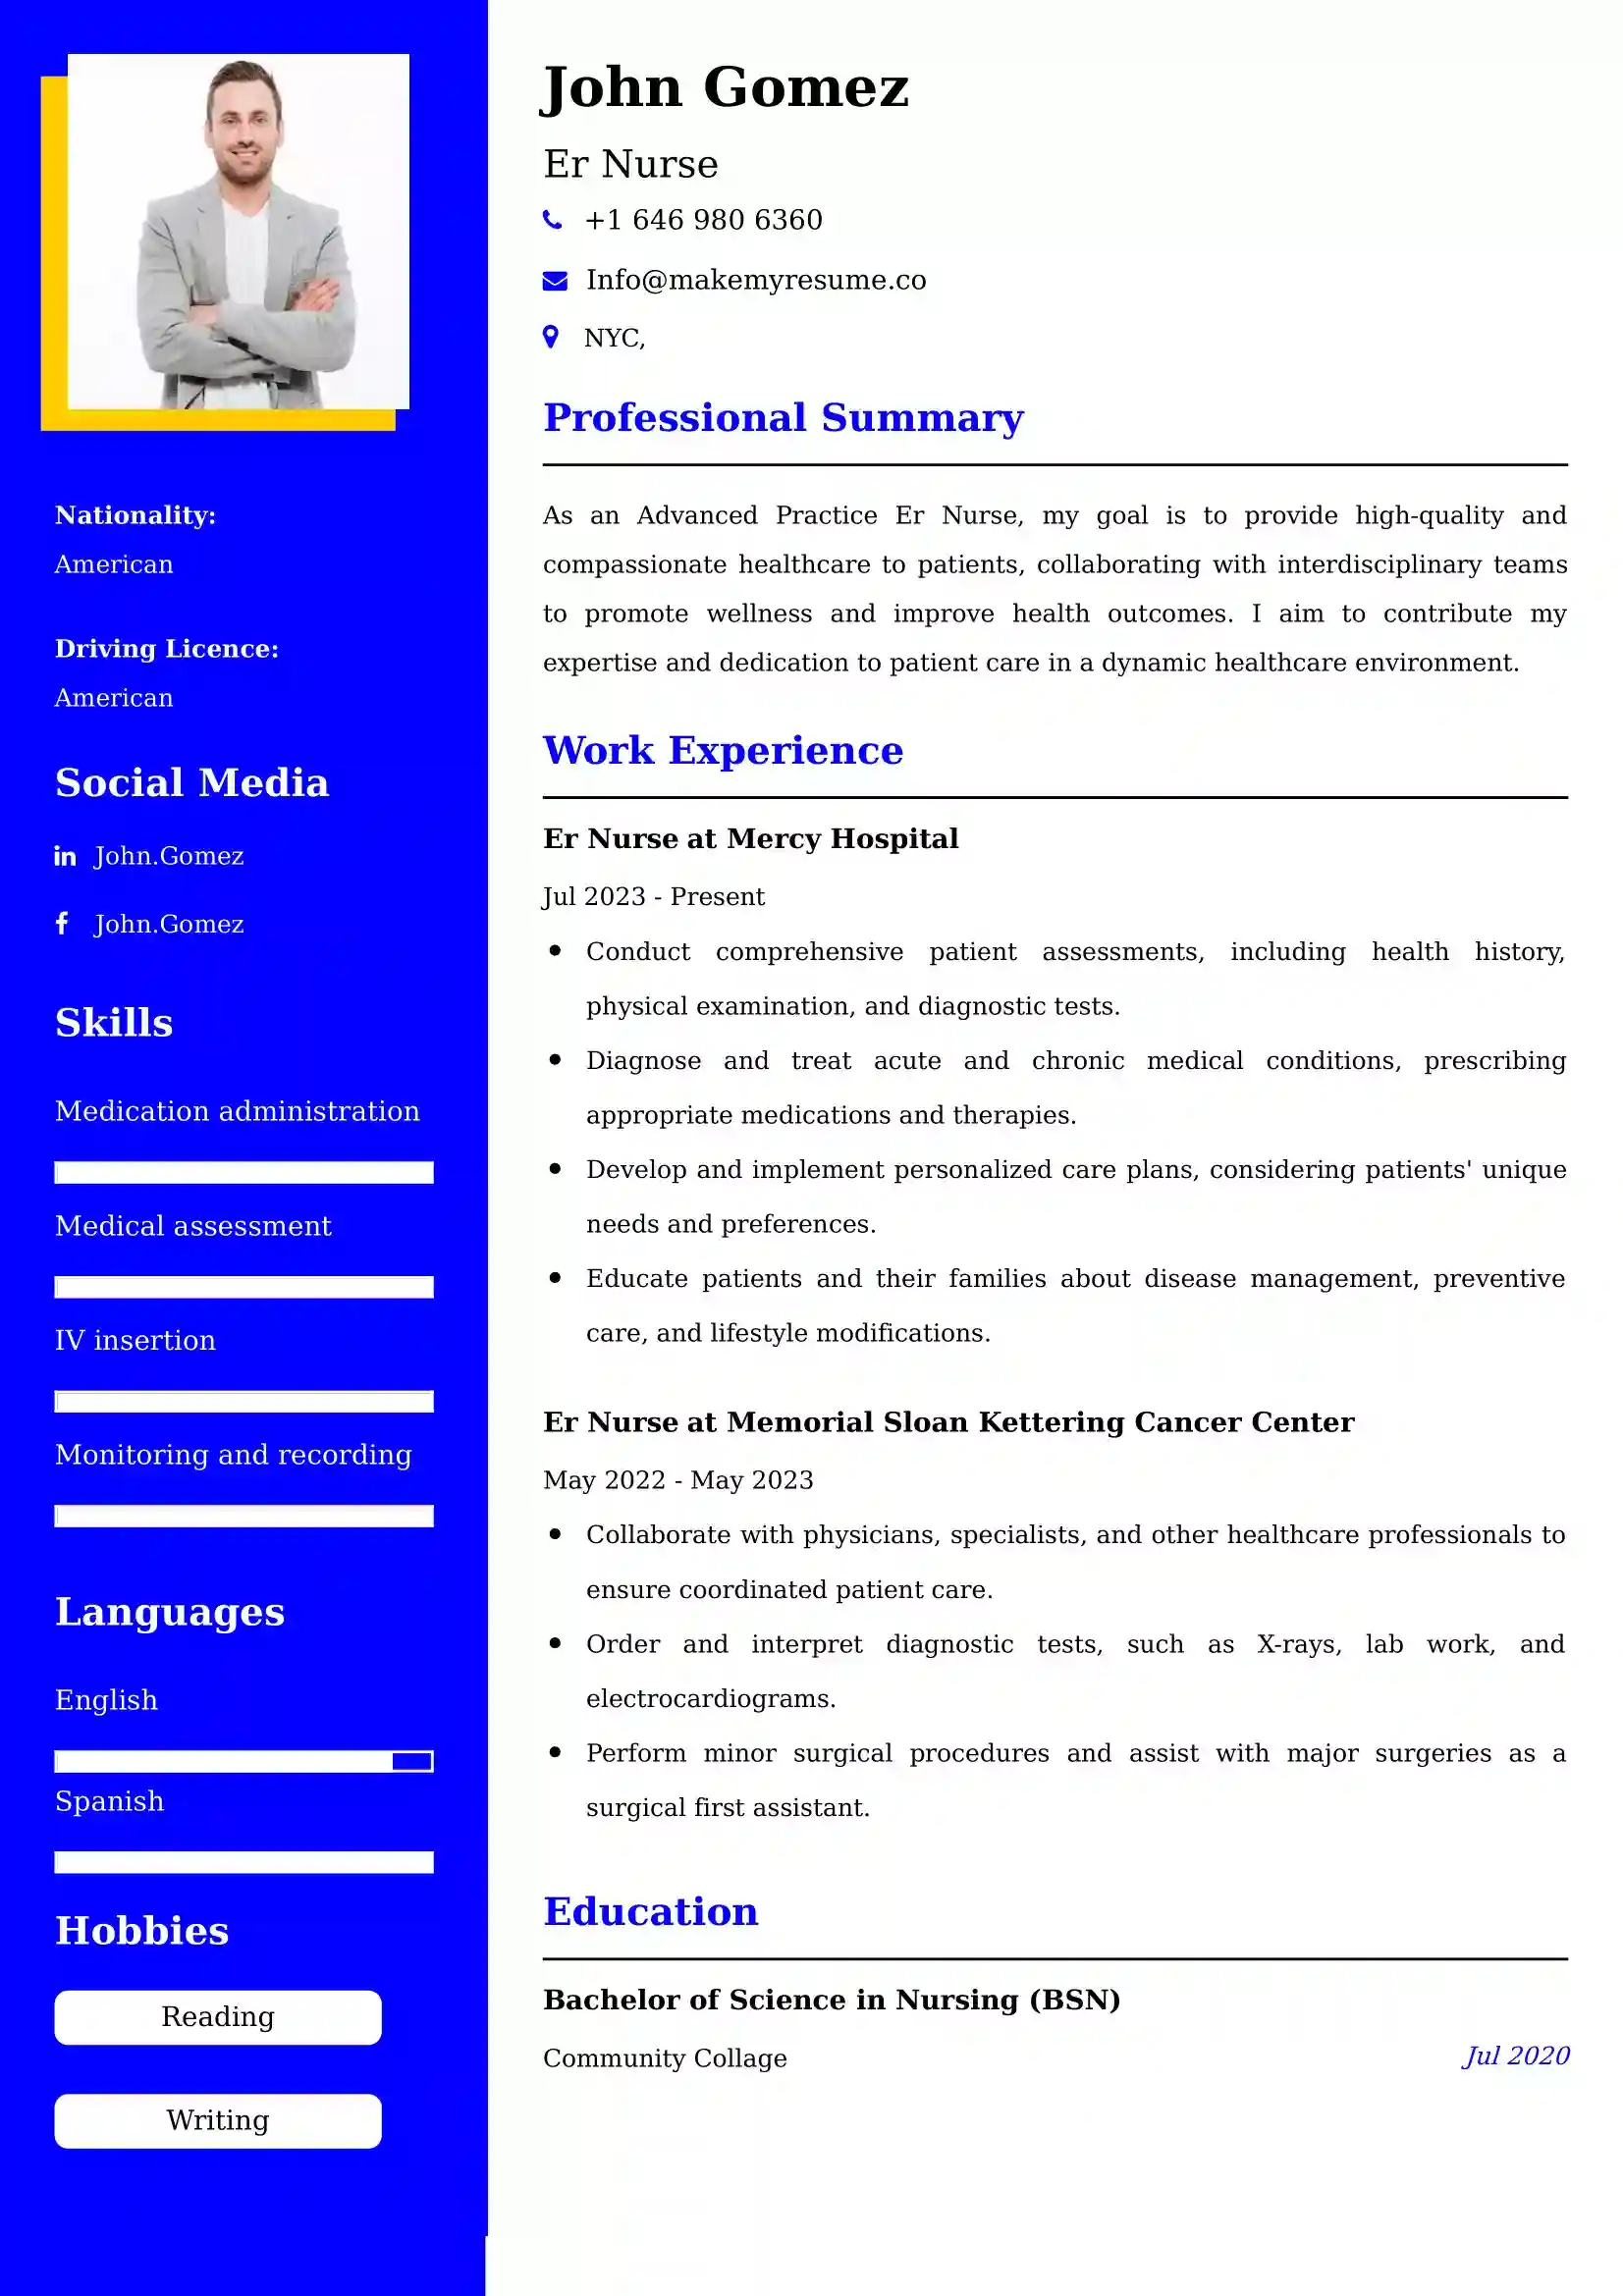 Er Nurse Resume Examples - UAE Format and Tips.